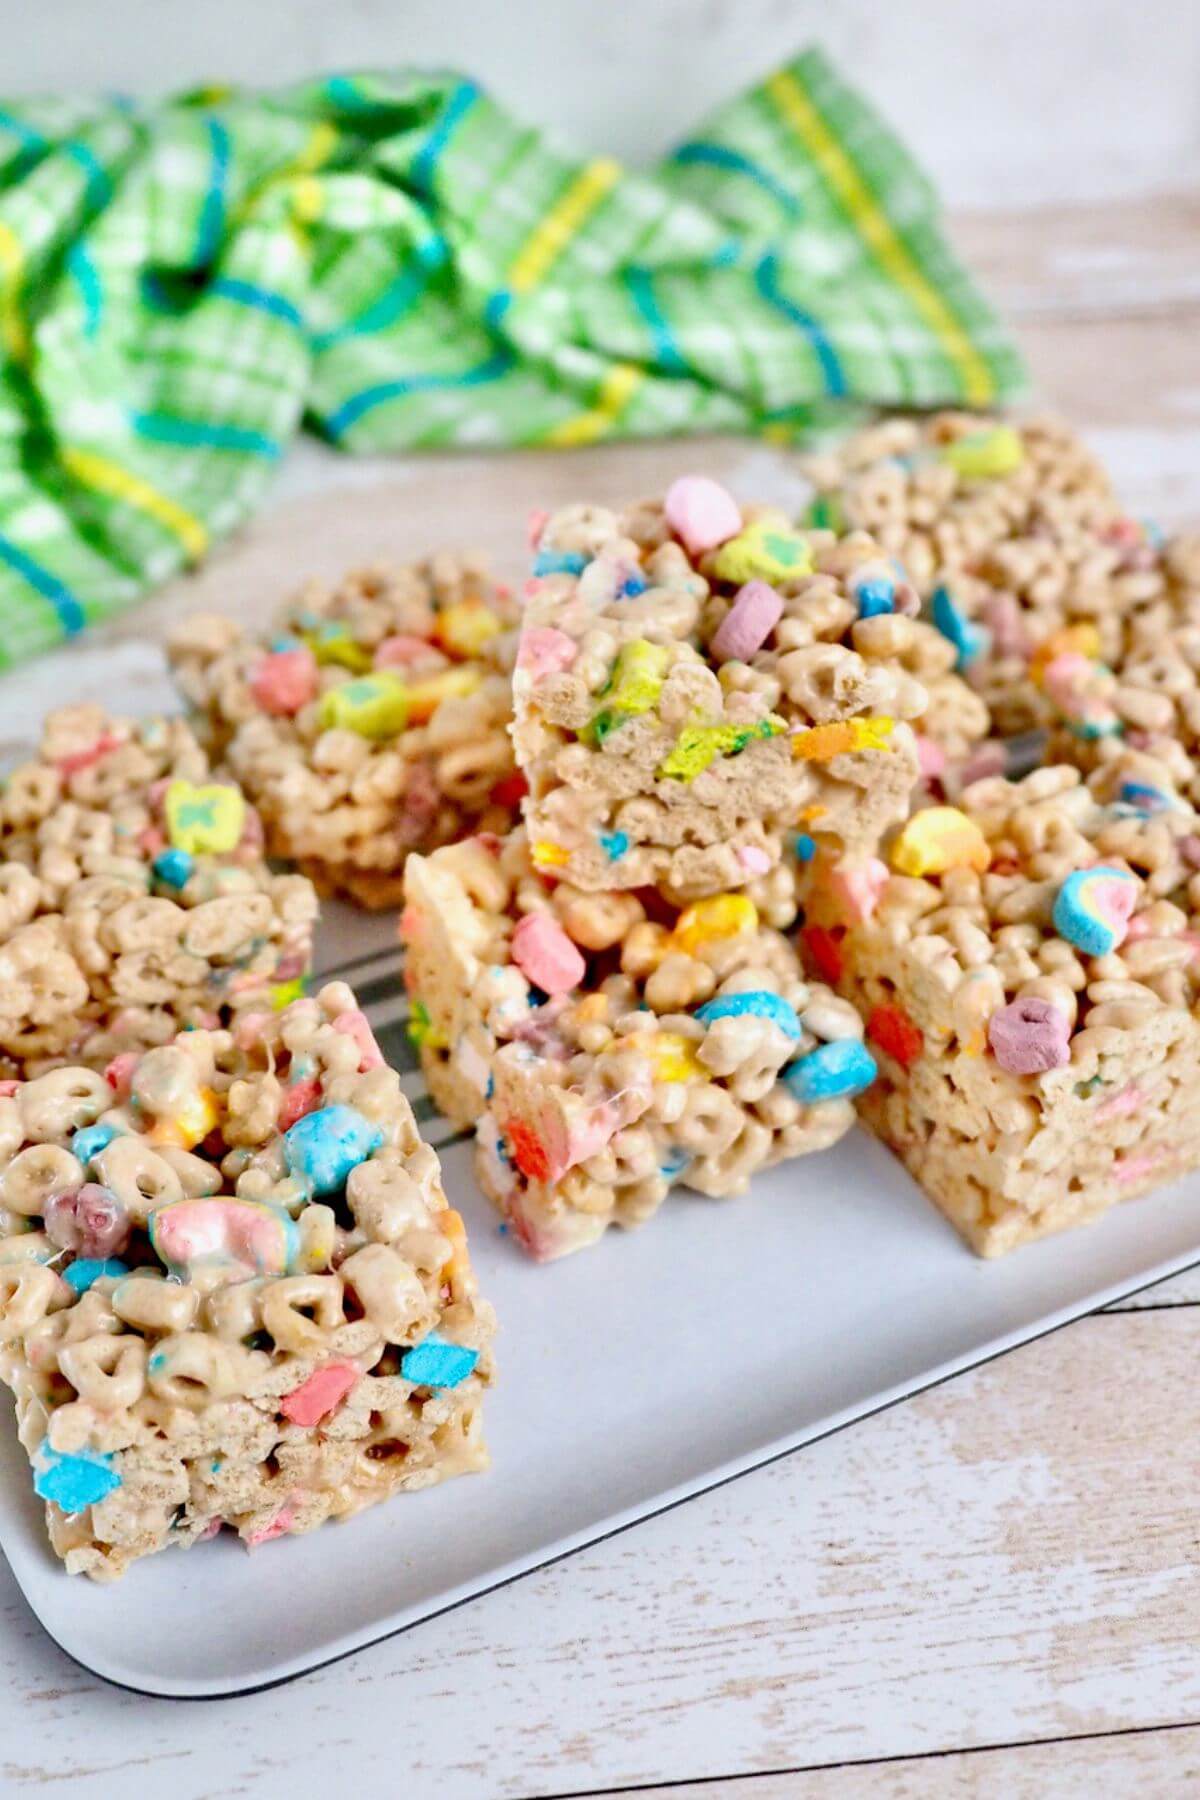 Tray filled with chewy Lucky Charms desserts.